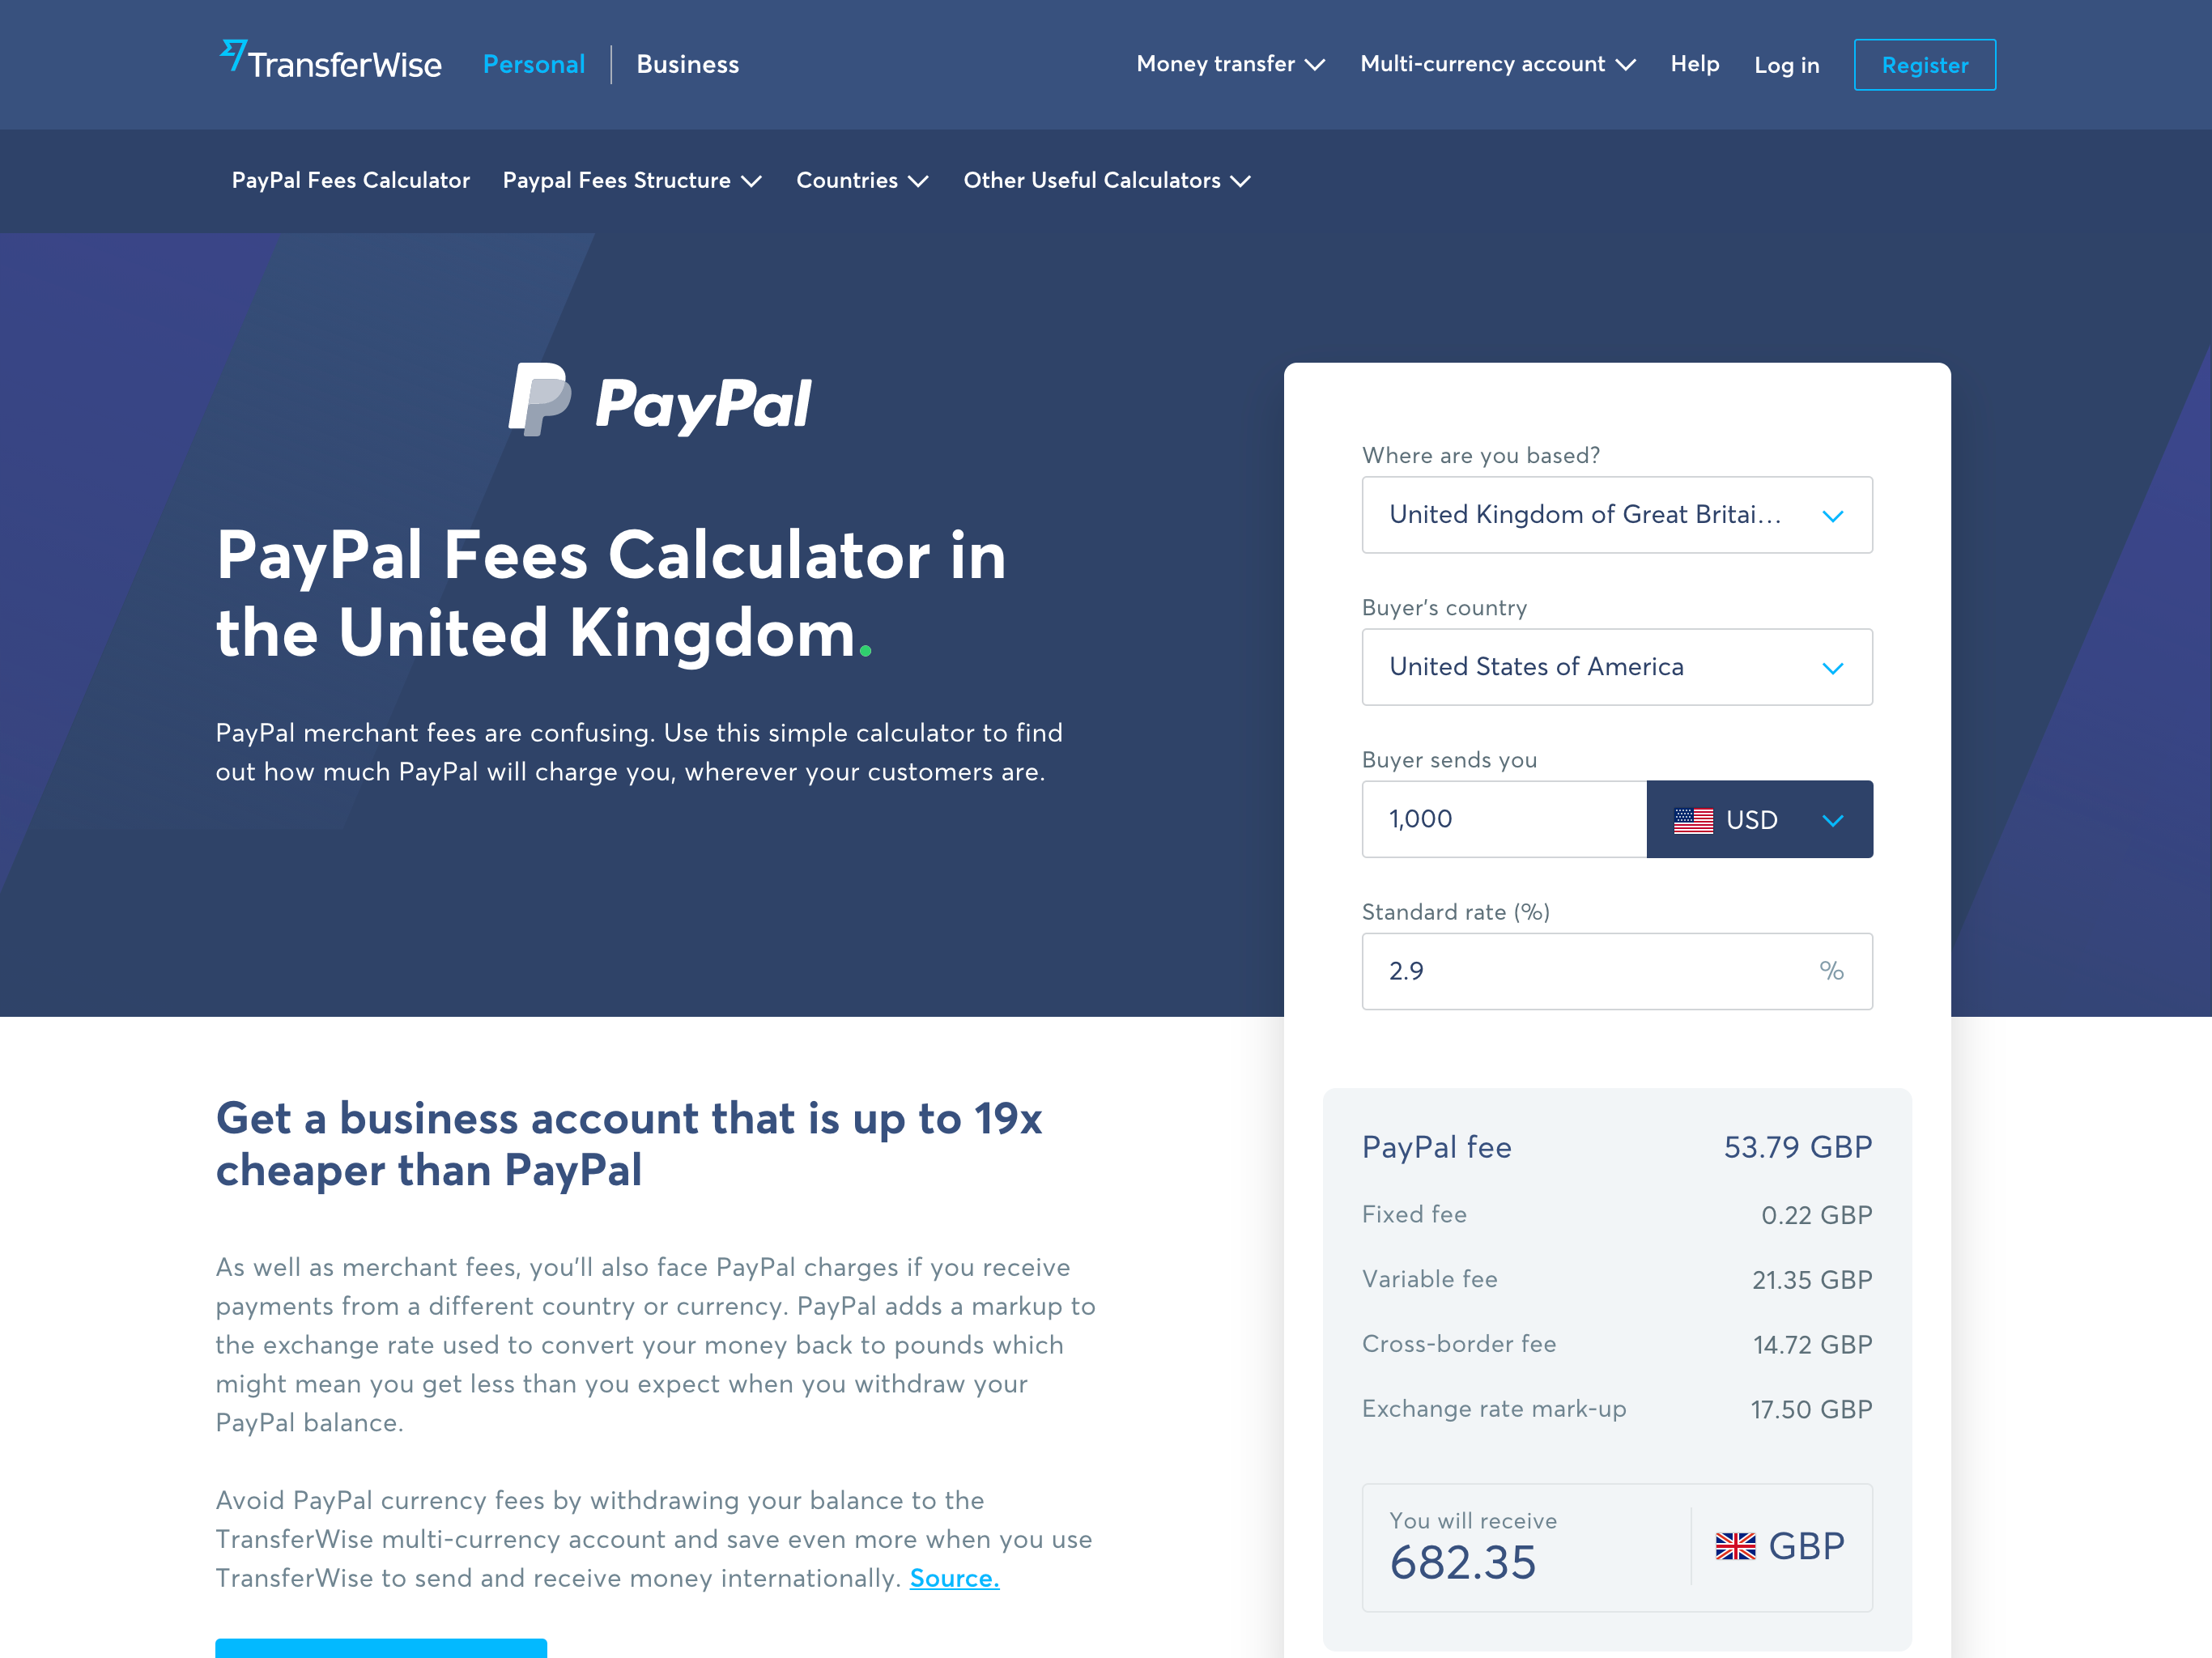 PayPal fee calculator page